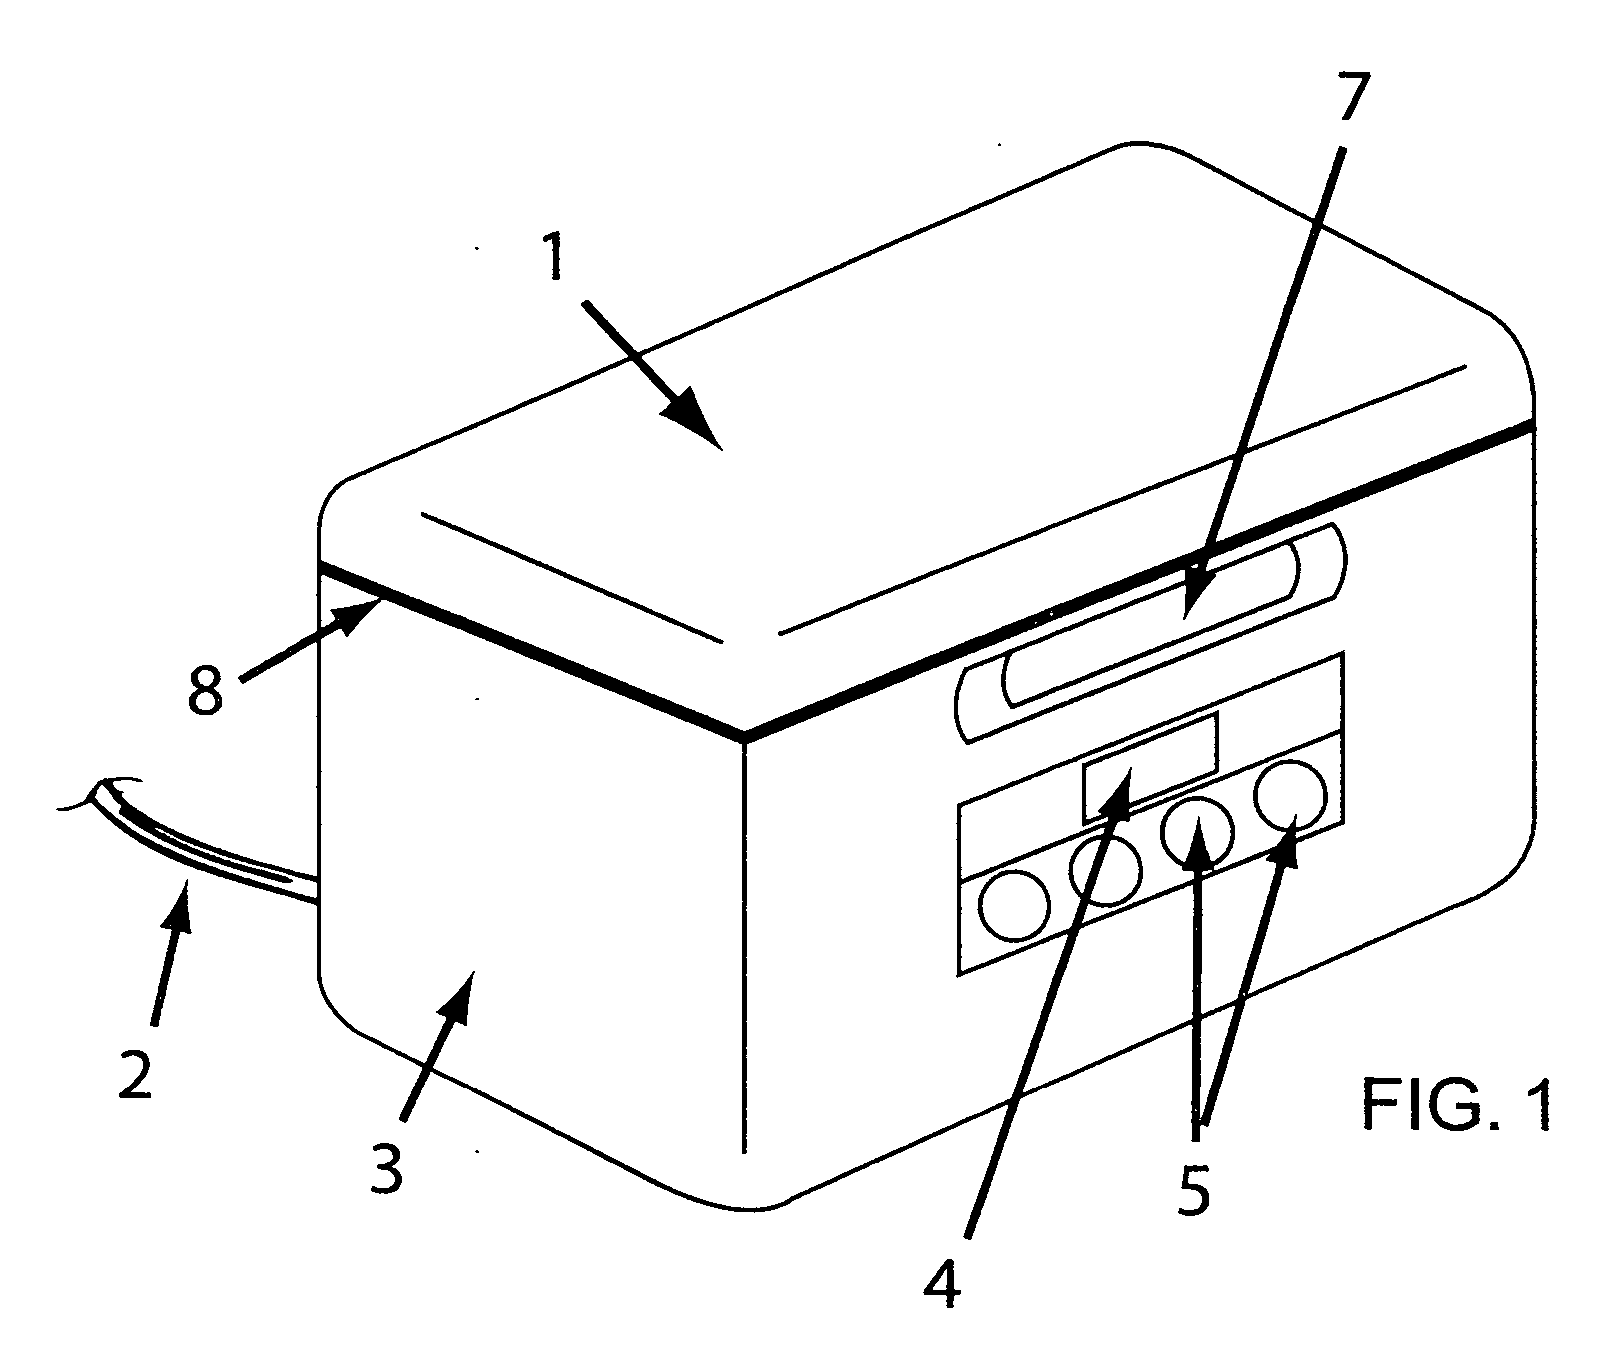 Universal preparation and organization station/facility and airtight apparatus/appliance for the storage of baked goods and/or foodstuffs with a built in vacuum pump